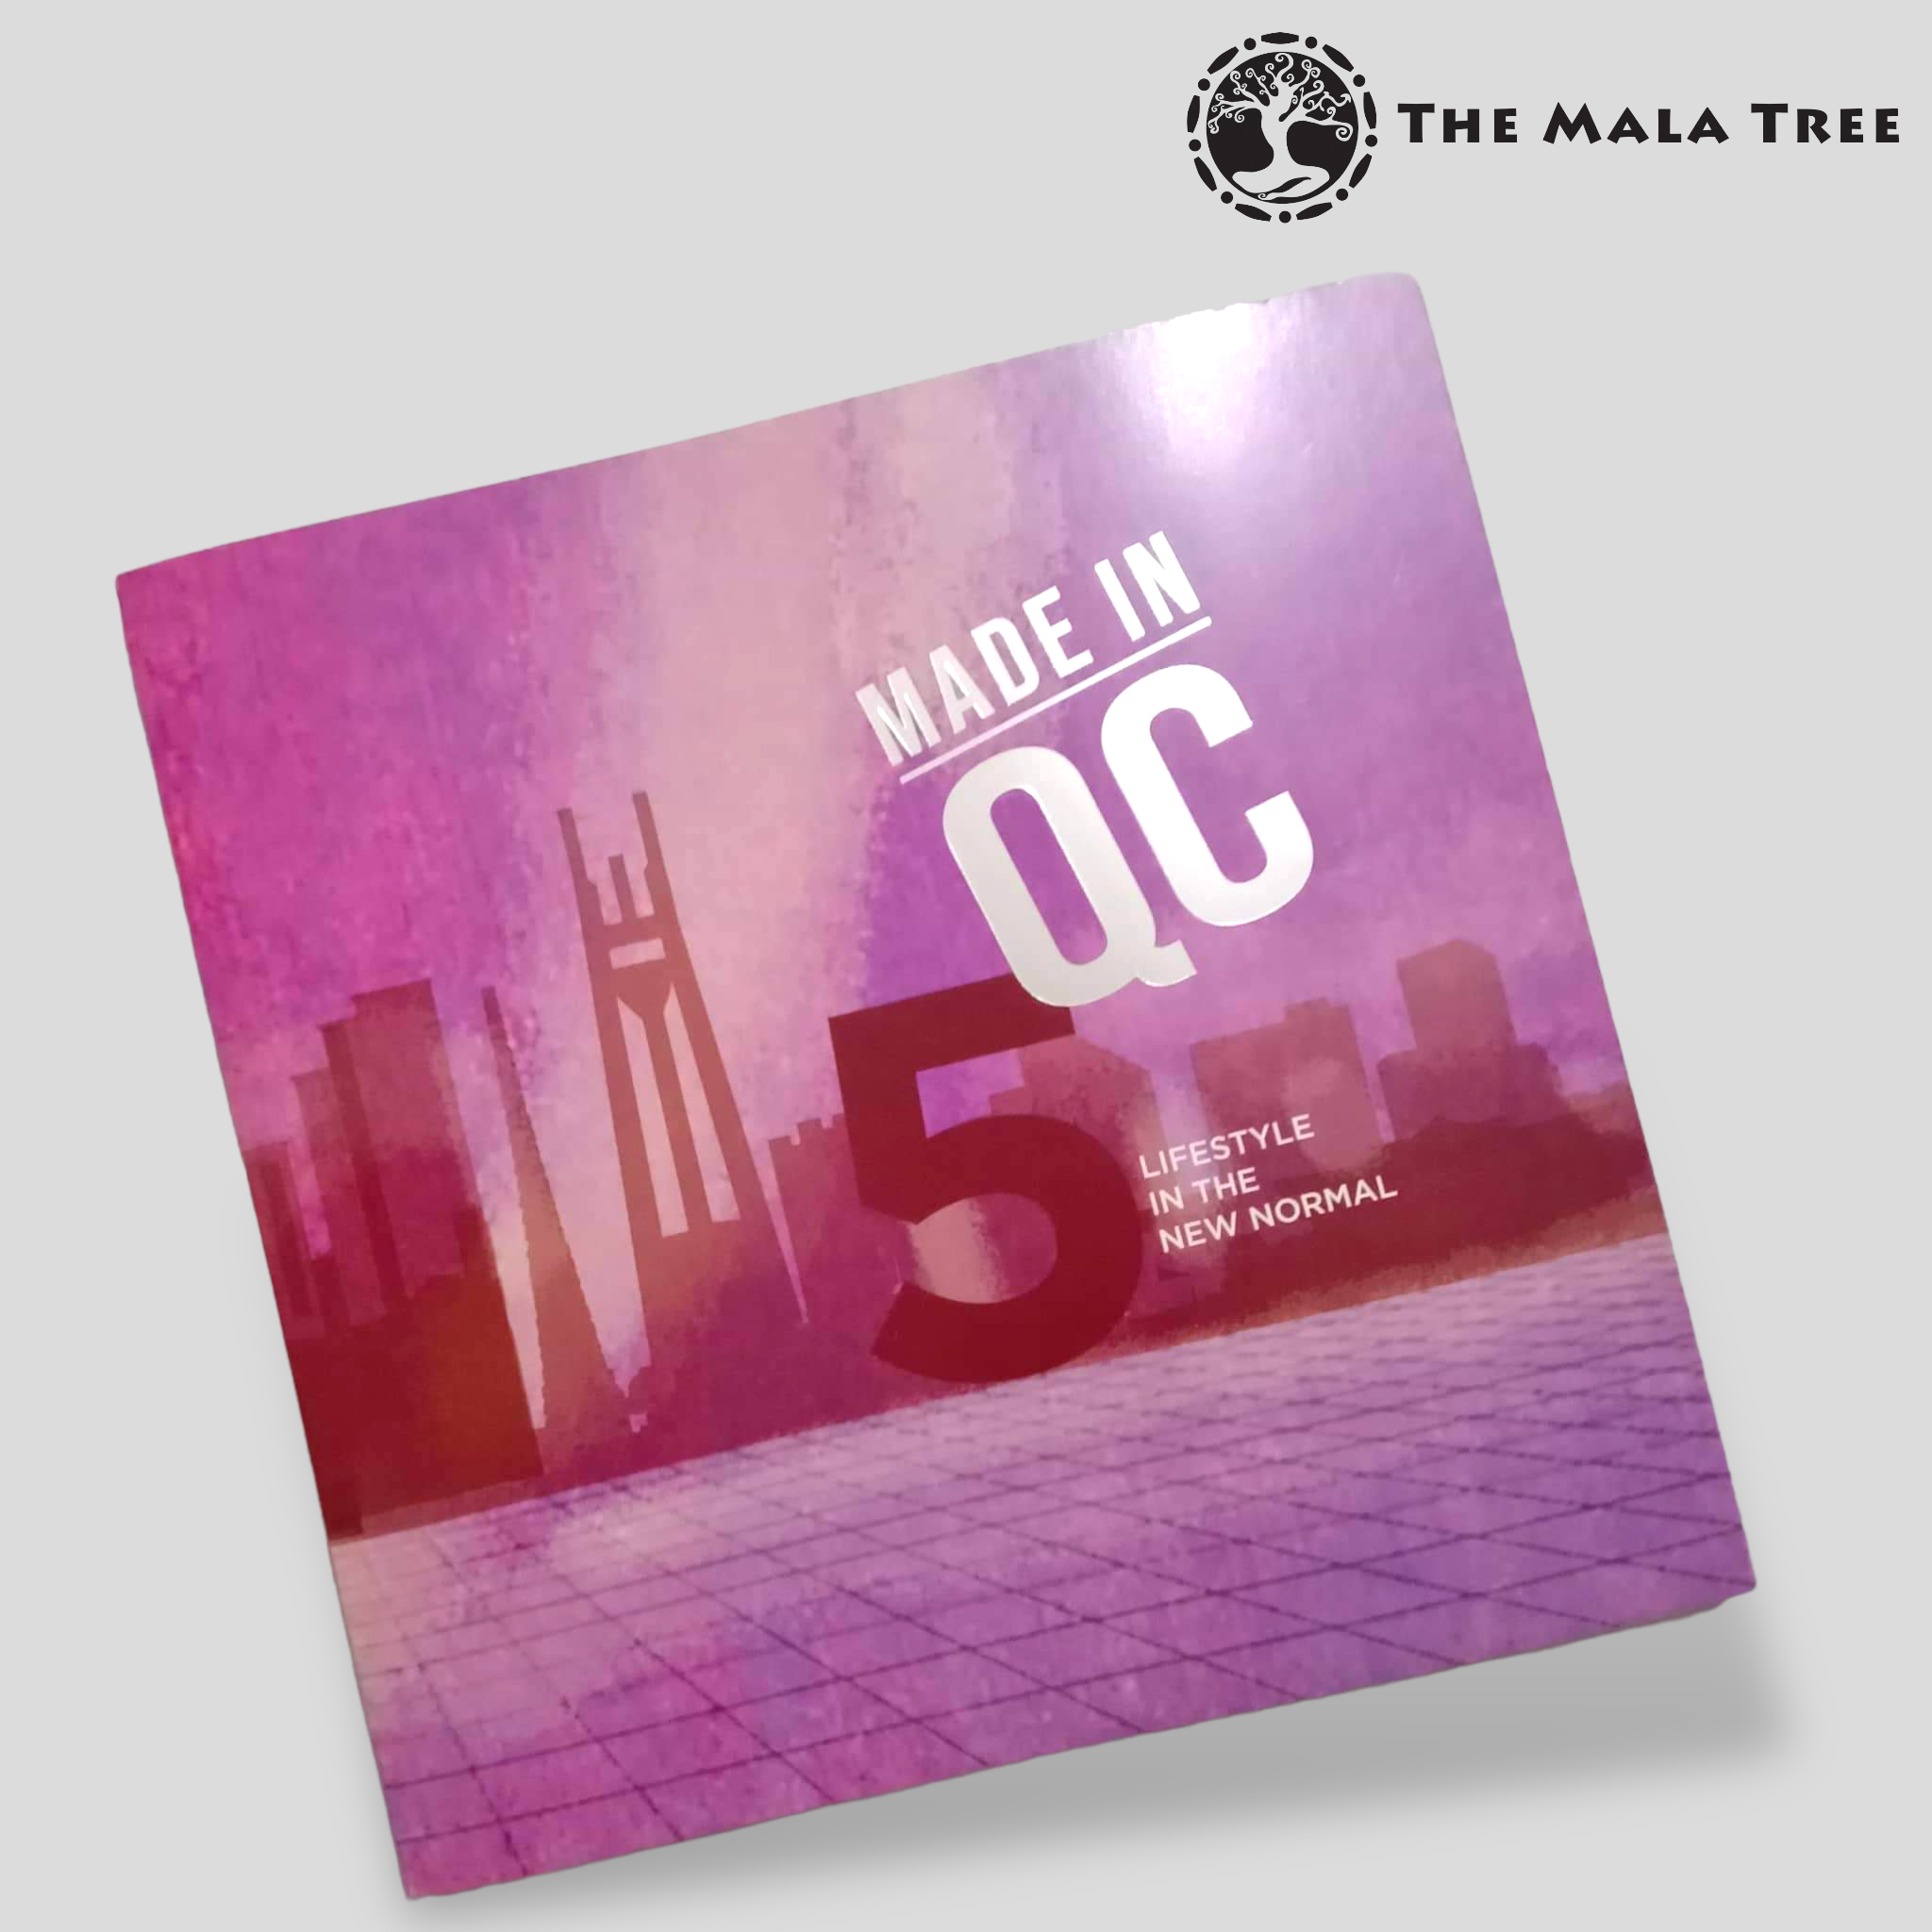 The Mala Tree gets featured in “Made in QC” coffee table book by the Quezon City Government